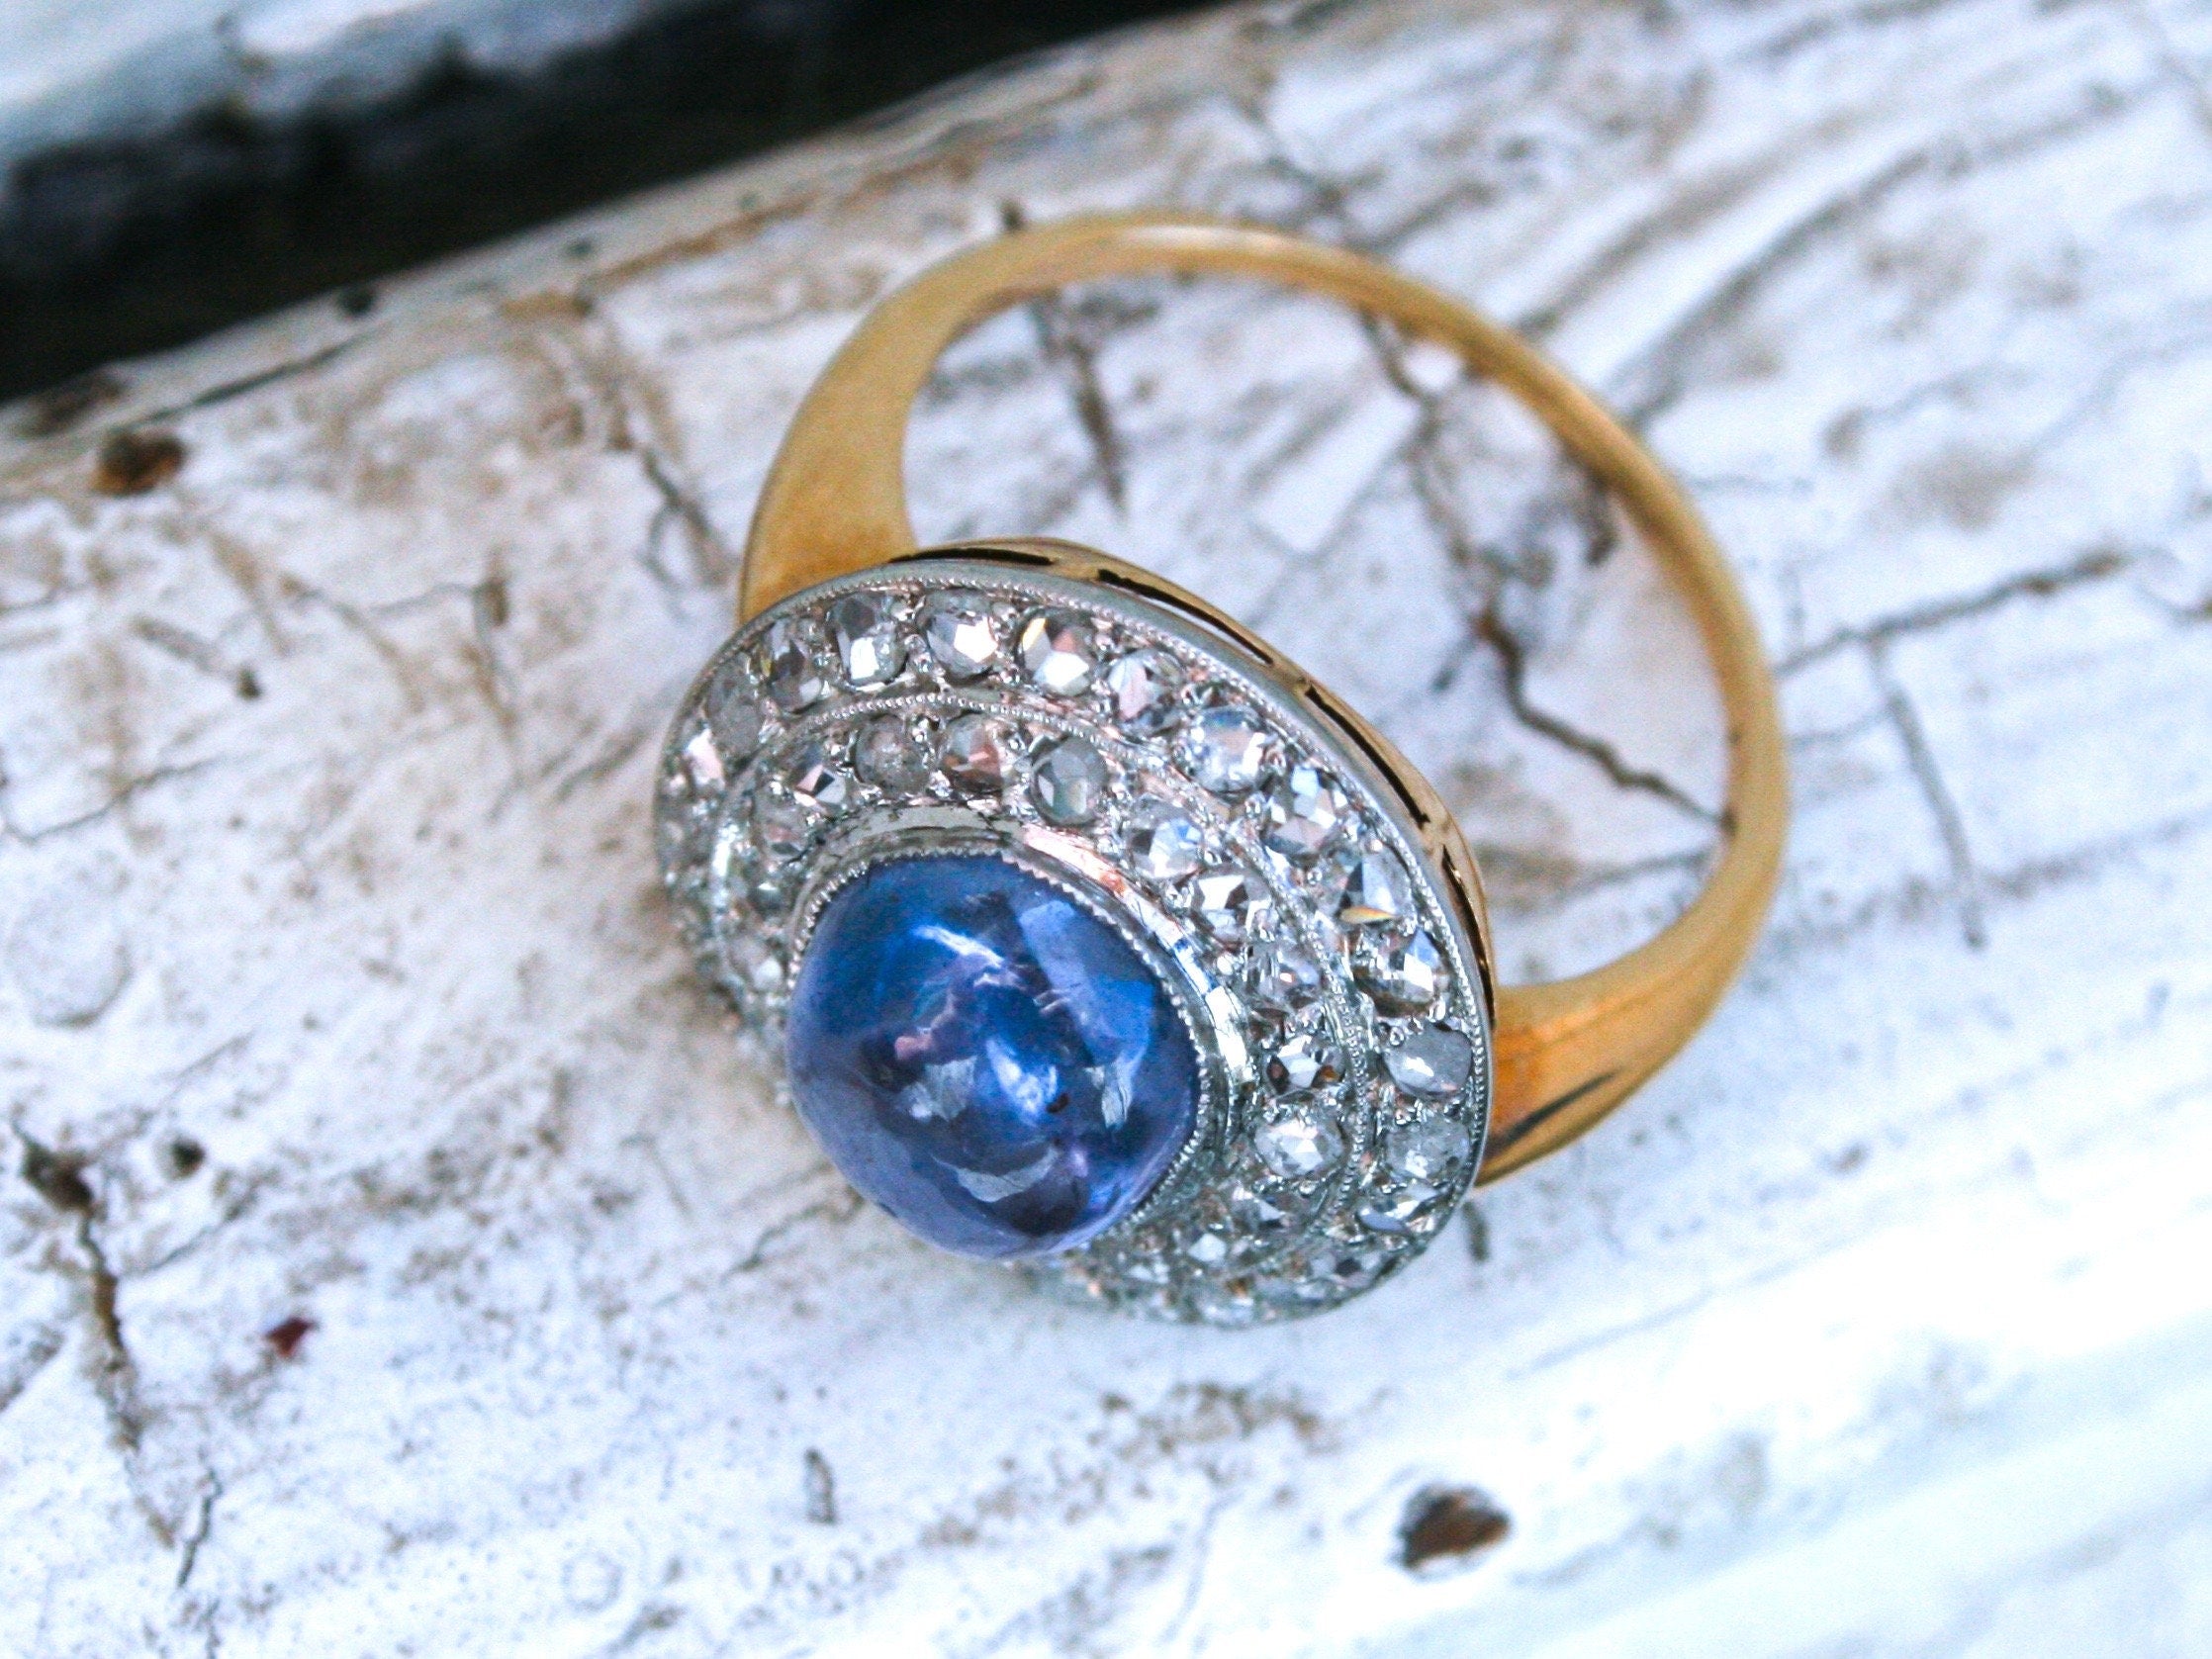 Beautiful Antique 14K Yellow Gold/ Platinum Diamond and Sapphire Cabochon Engagement Ring - 3.69ct.